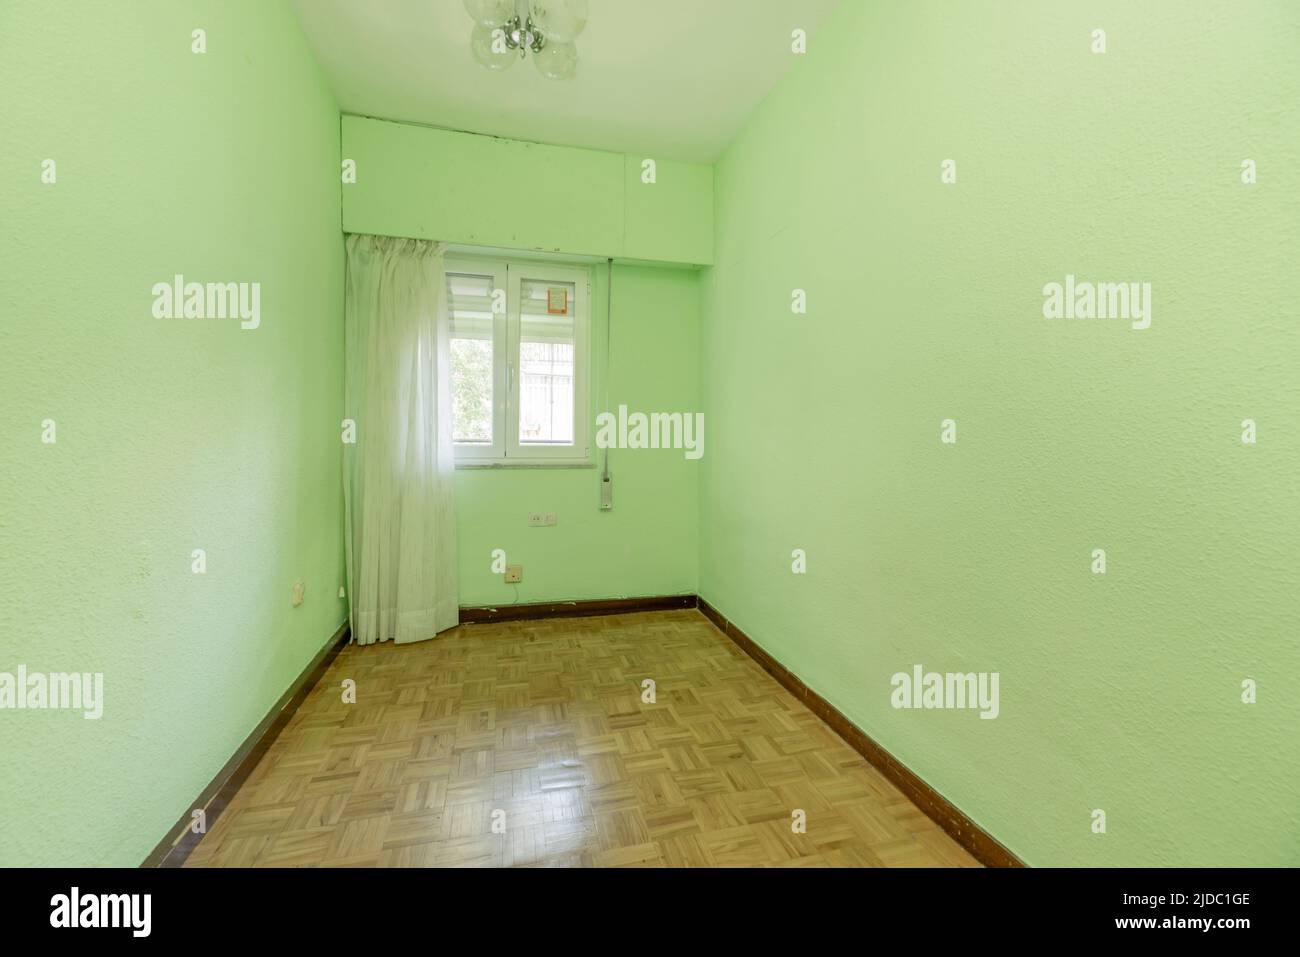 Empty room with light green painted walls and curtain with white curtains Stock Photo